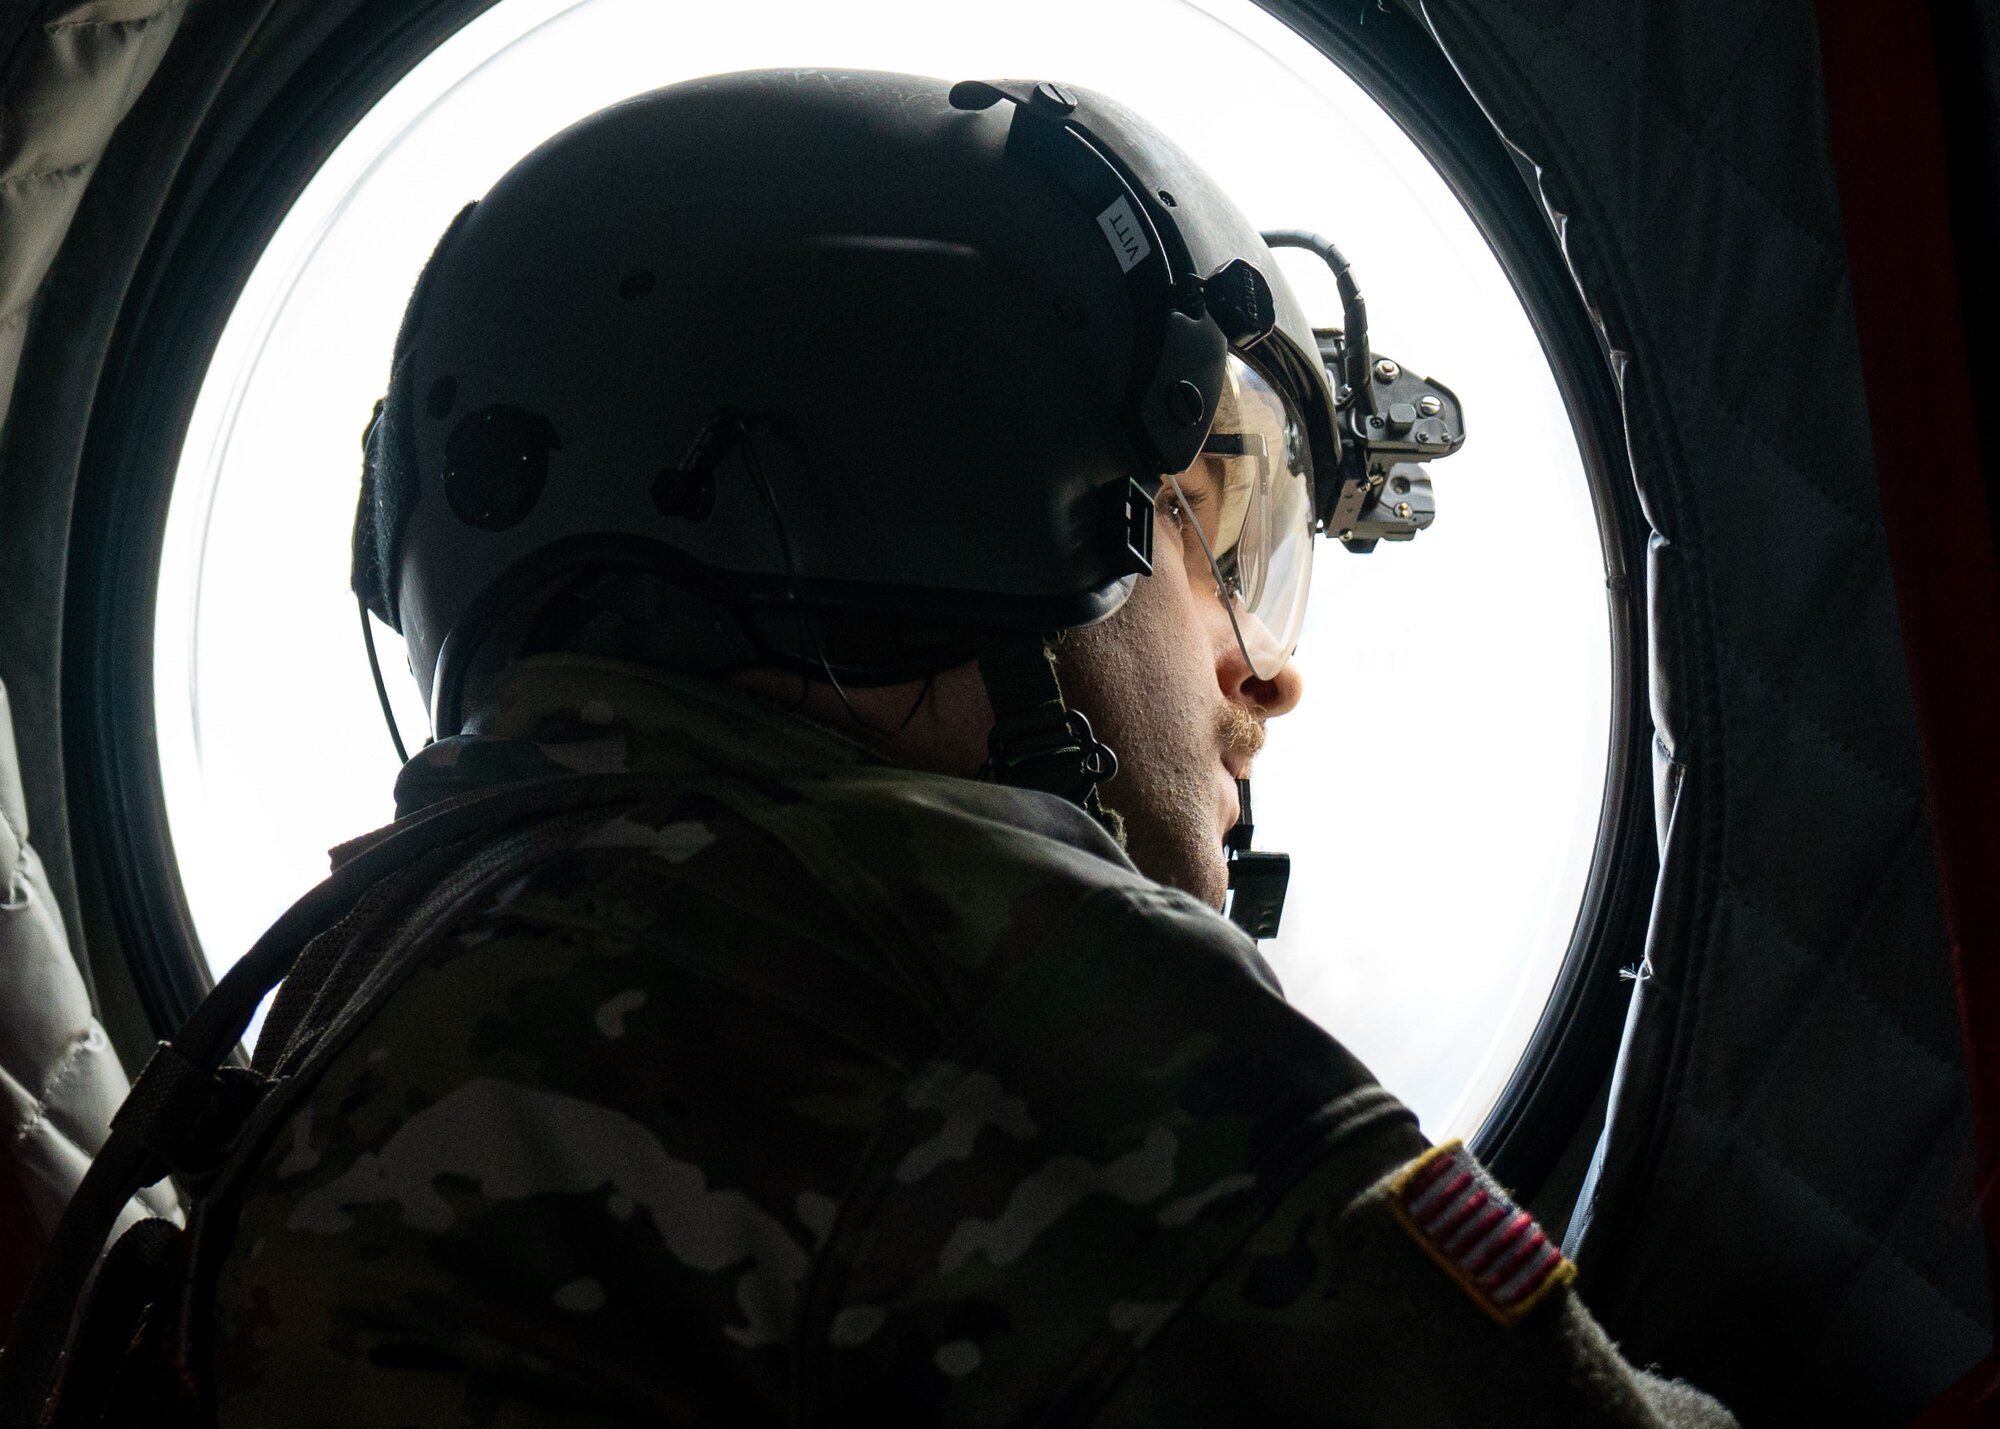 A U.S. Army soldier assigned to Detachment 1, Bravo Company, 2-211th General Service Aviation Battalion, Army National Guard, looks out of the window of a CH-47J Chinook as it transports pararescuemen assigned to the 212th Rescue Squadron, Alaska Air National Guard, back from Malemute Drop Zone during a training event at Joint Base Elmendorf-Richardson.